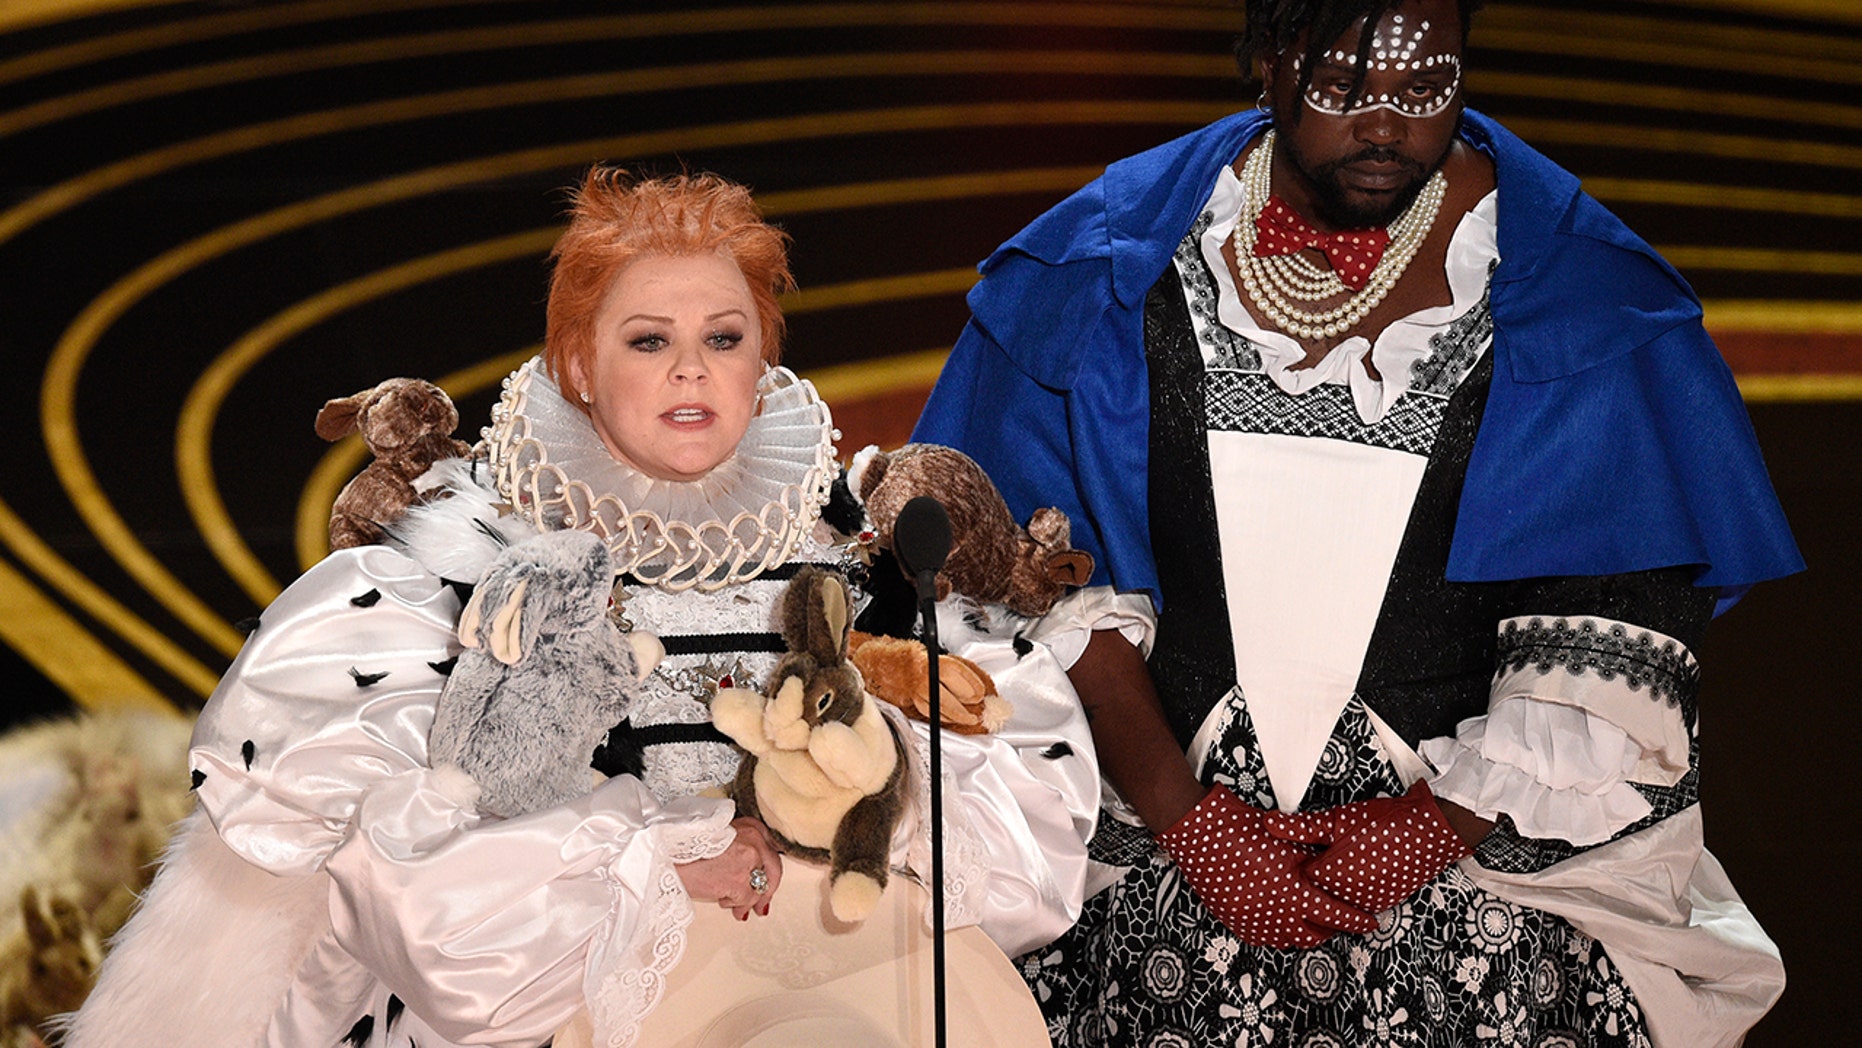 Top: Oscars presenter Melissa McCarthy spoofs 'The Favourite' with bunny-covered ...1862 x 1048